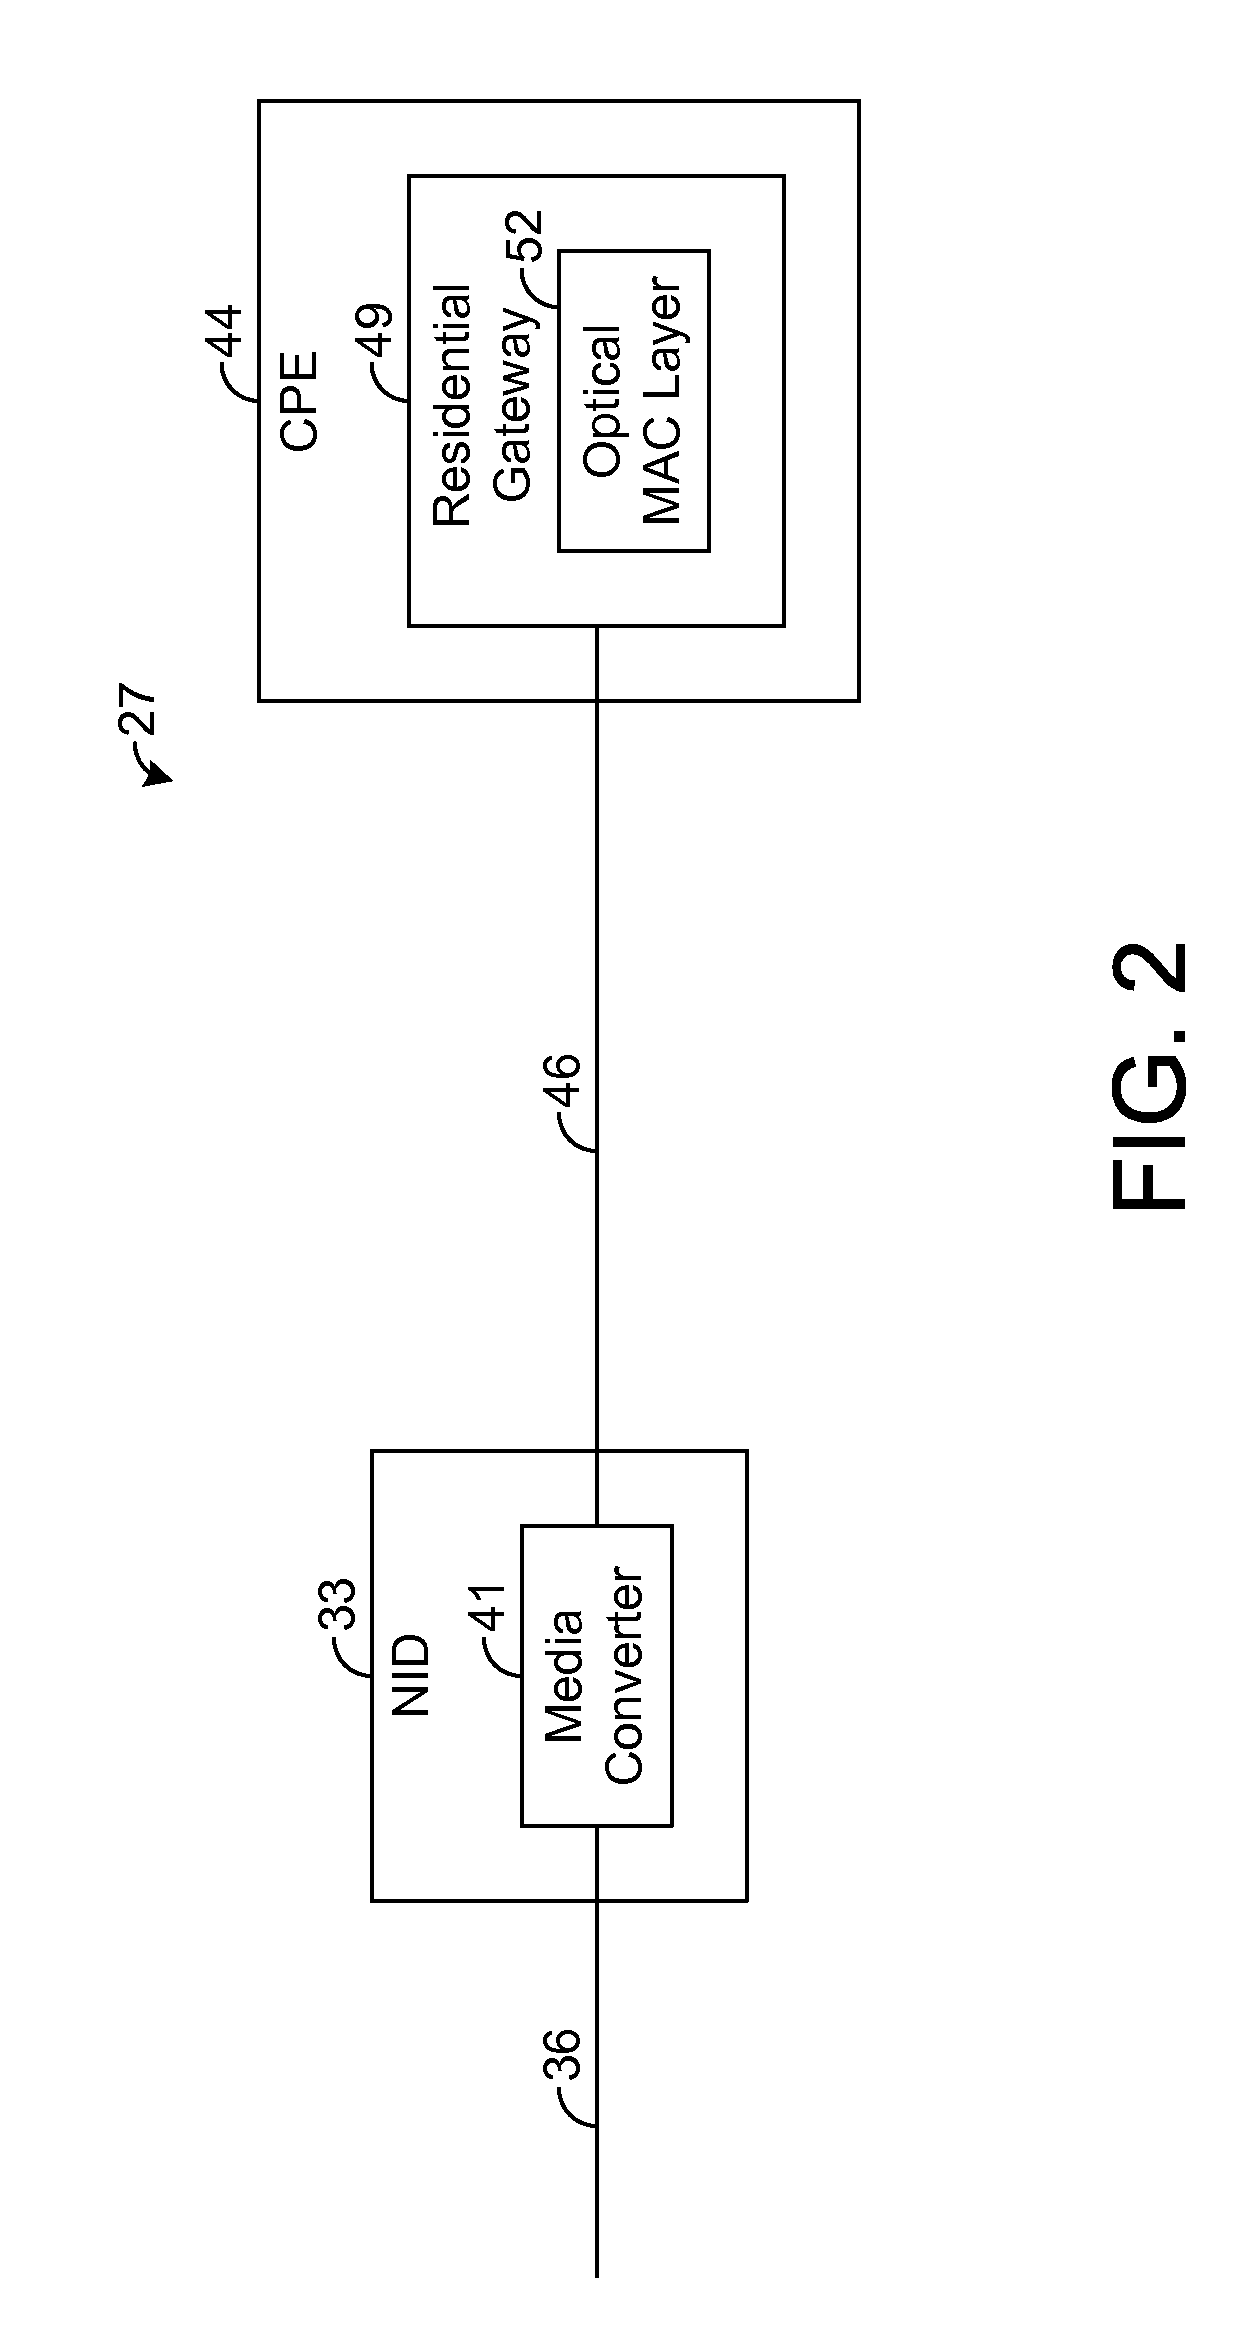 Systems and methods for extending optical network services across non-optical channels